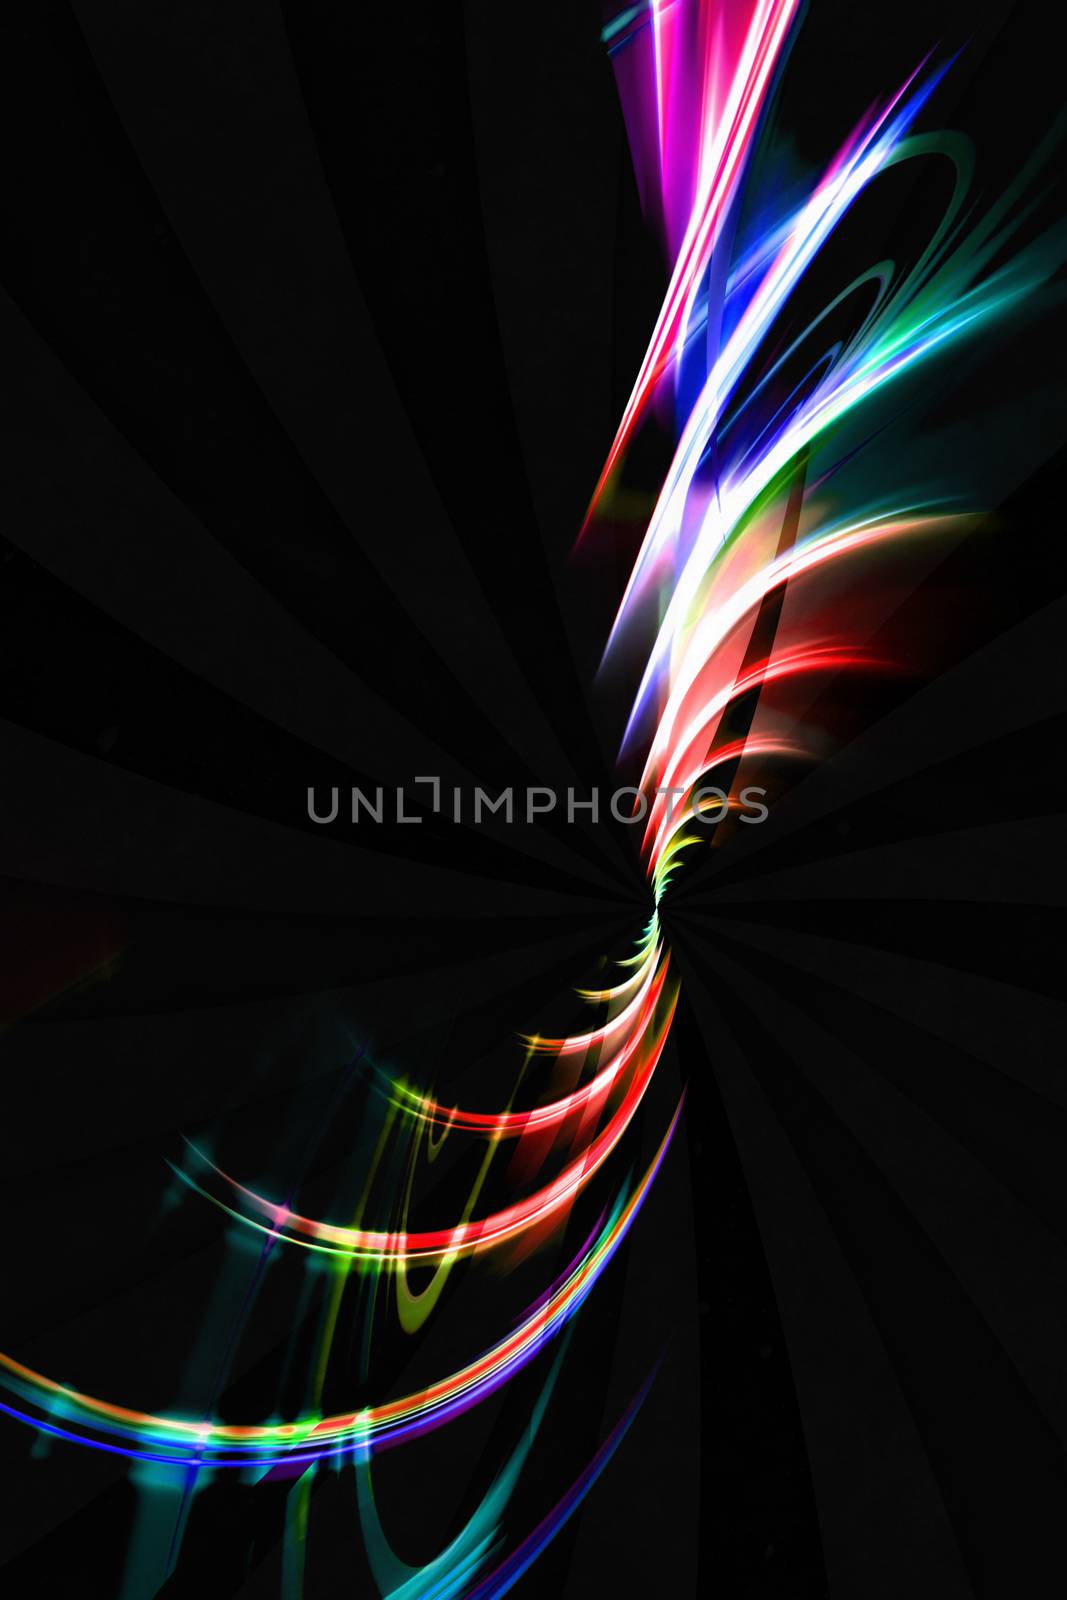 Abstract spiraling rainbow fractal design isolated over a black background.